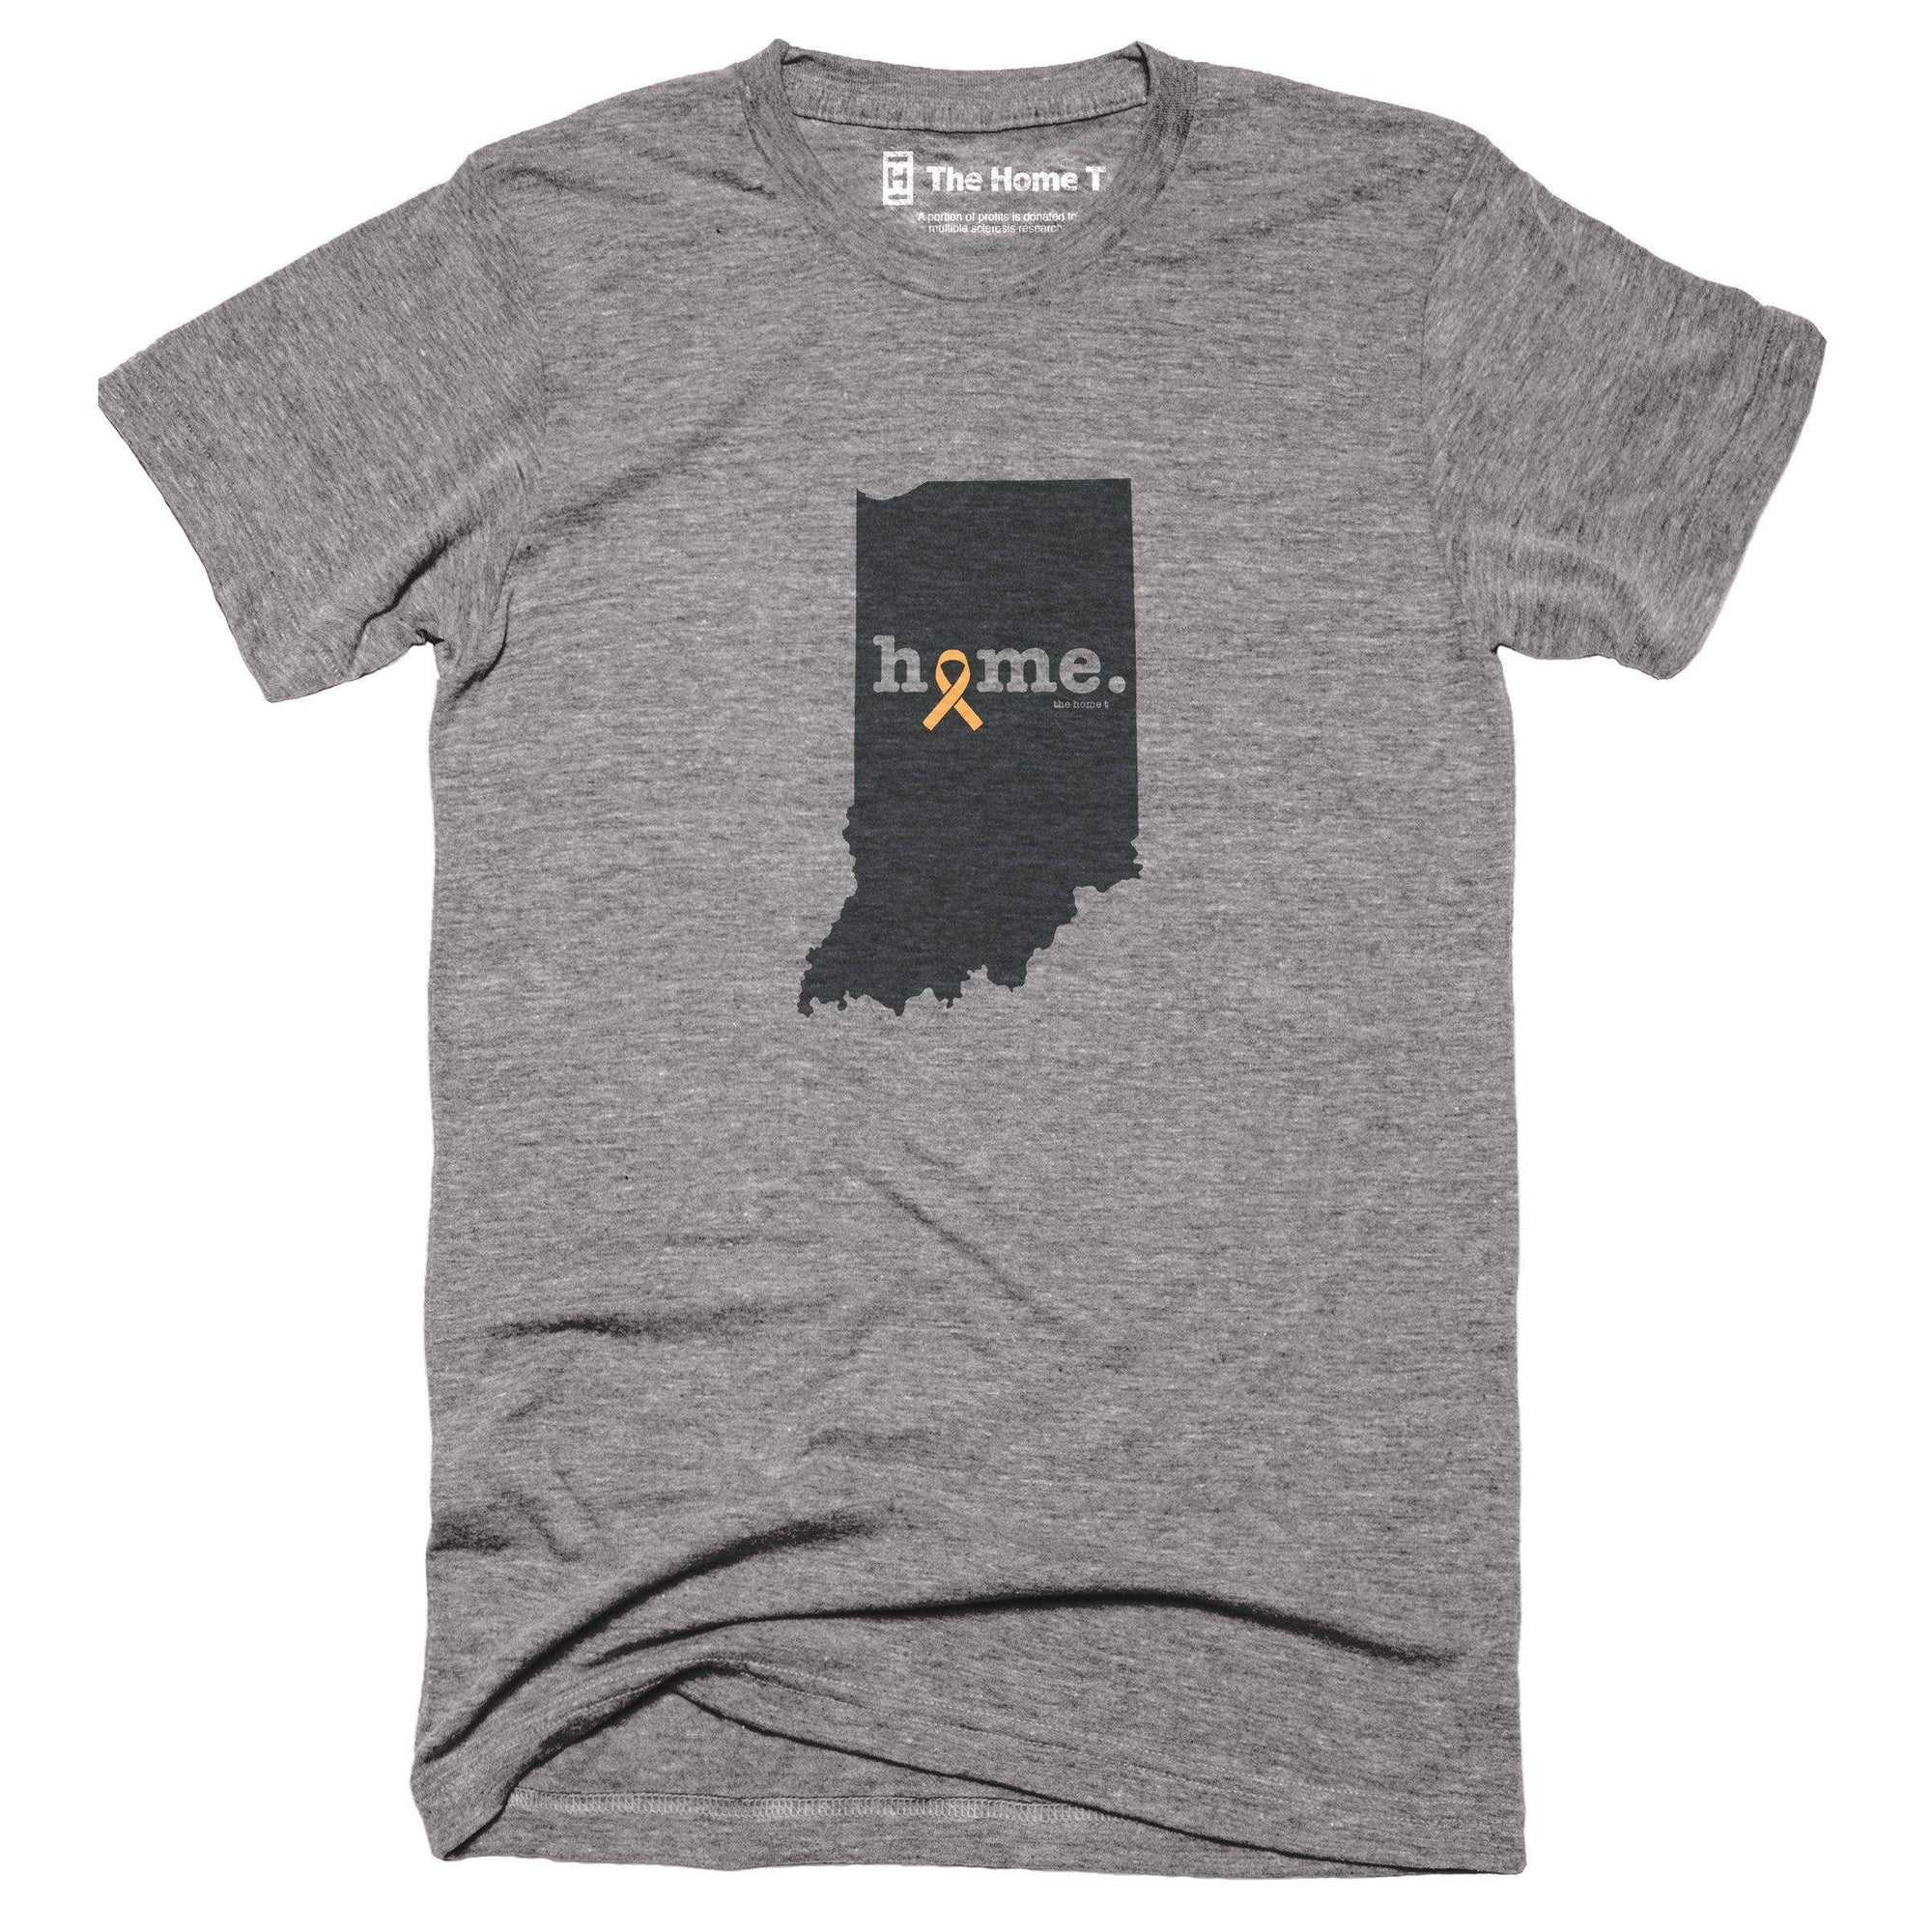 Indiana Clothing and Apparel - The Home T